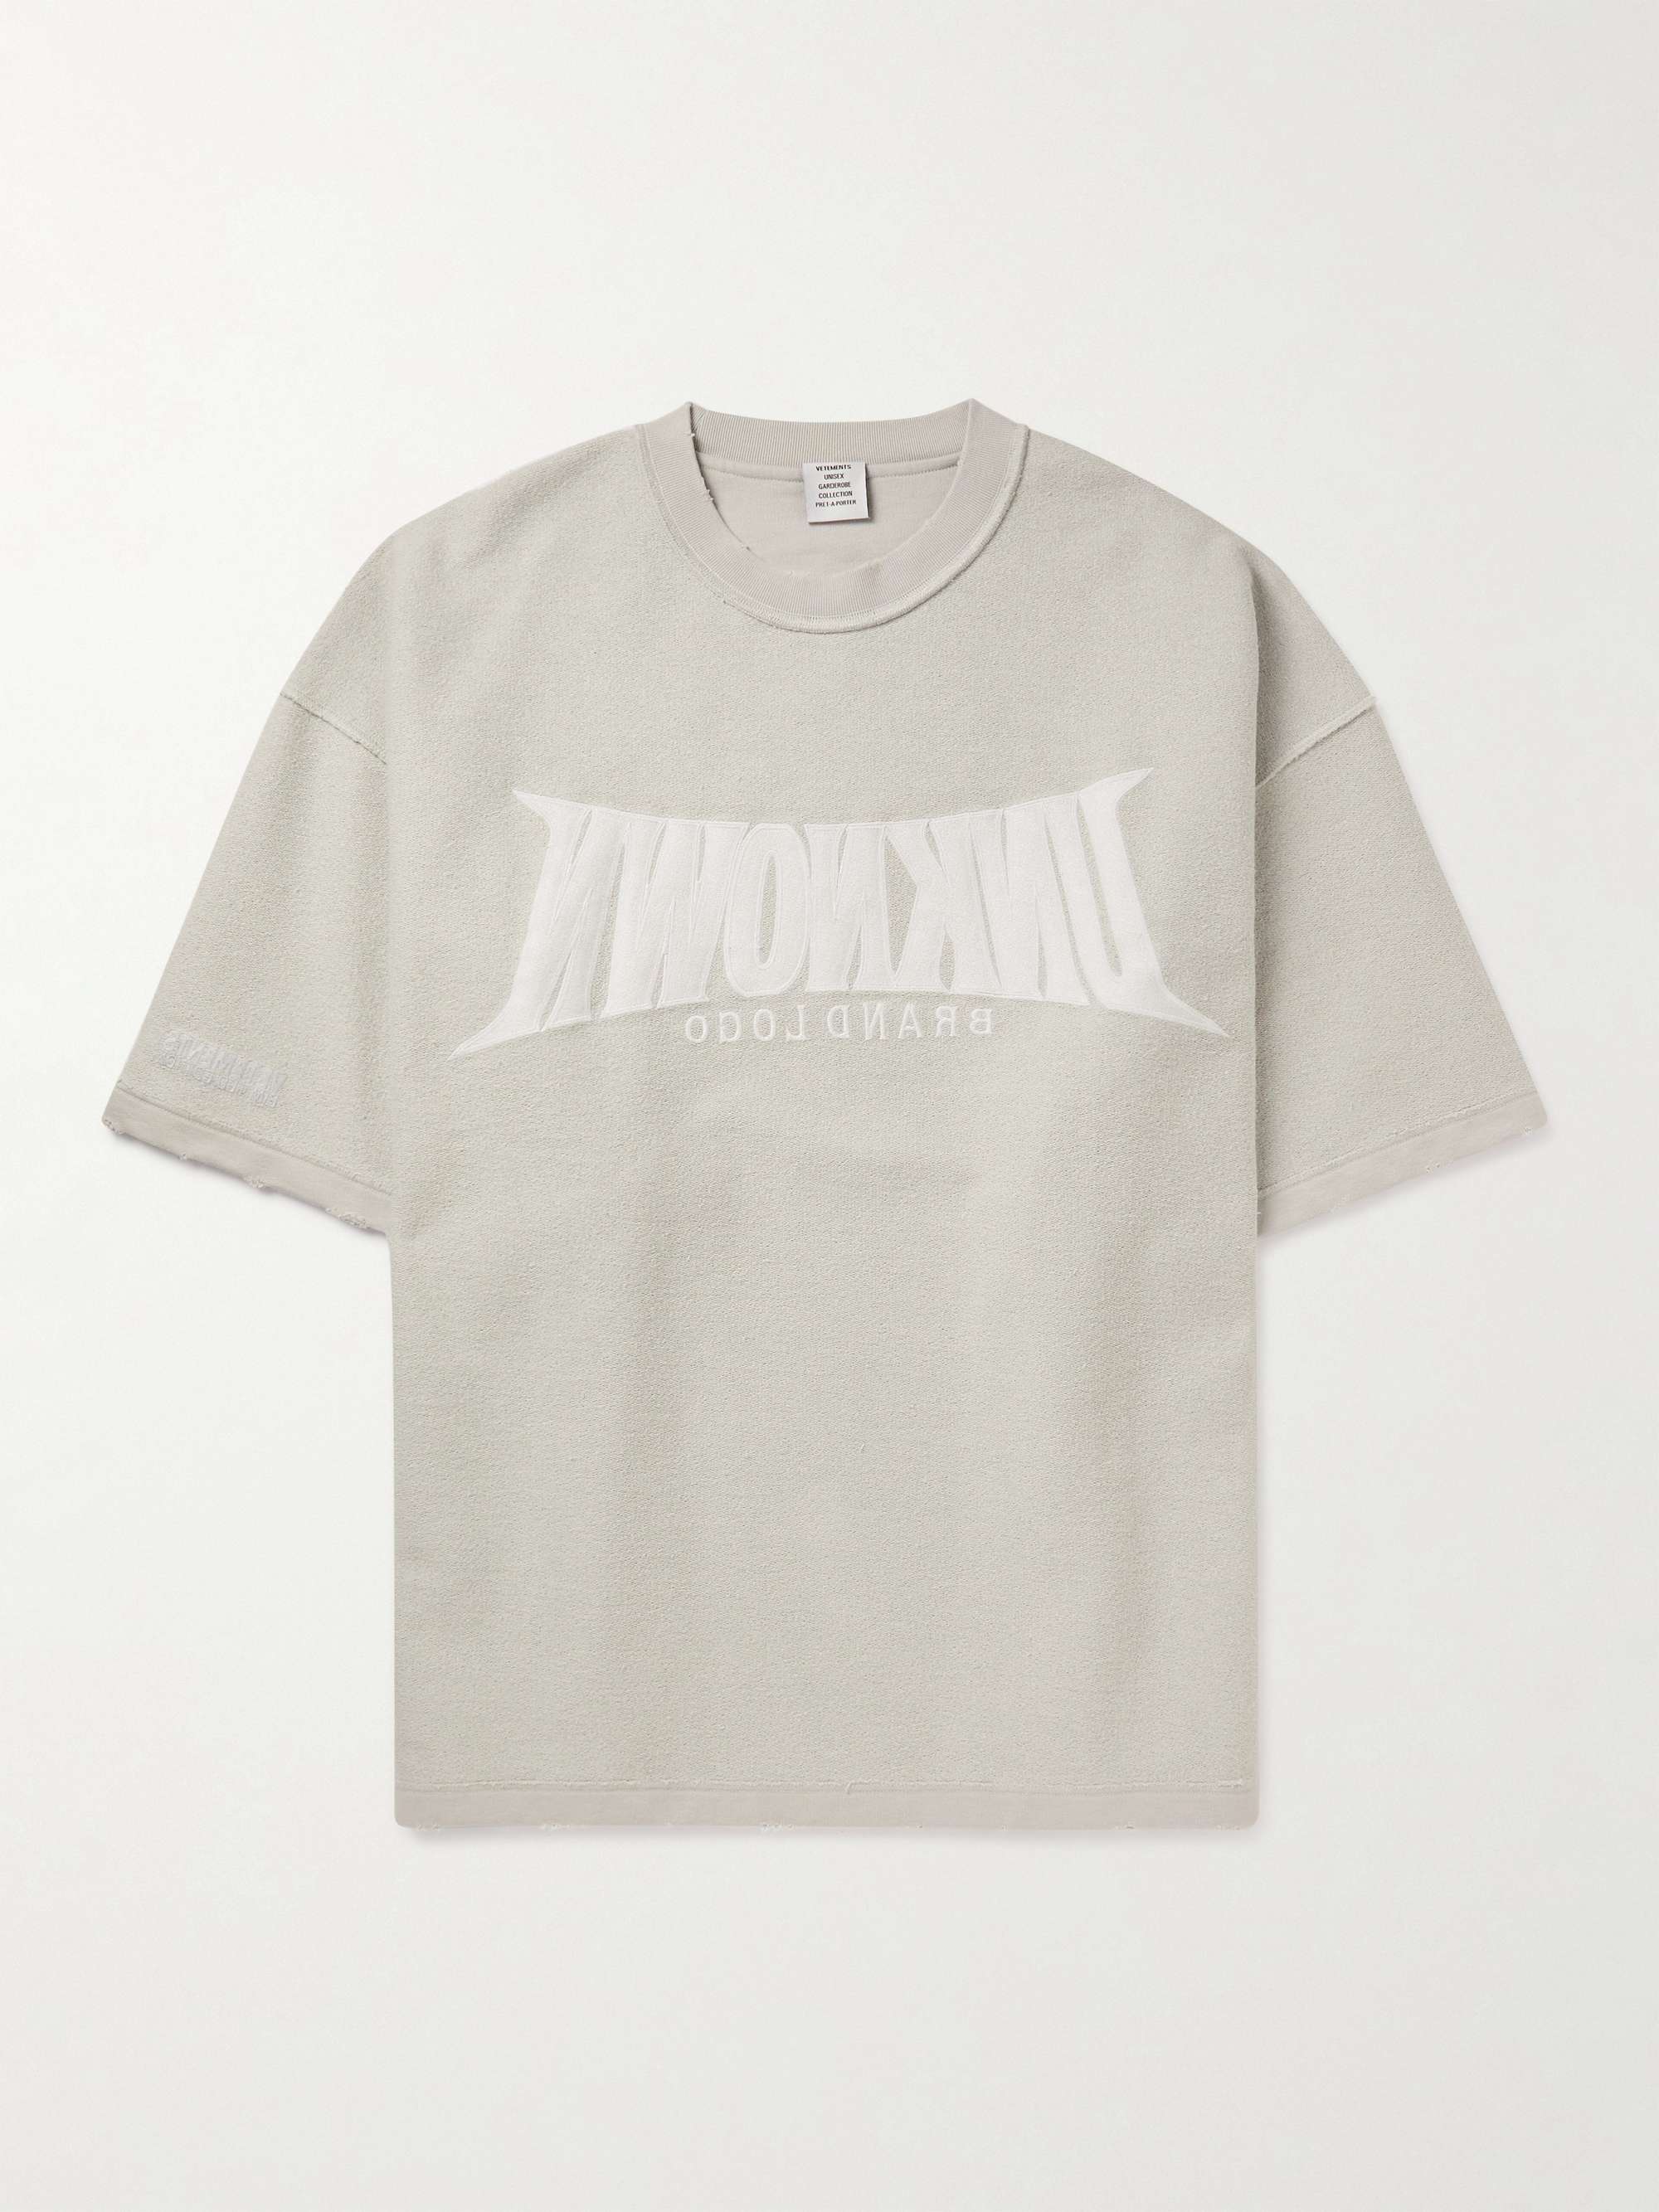 White Oversized Embroidered Cotton-Blend Jersey T-Shirt | VETEMENTS | MR  PORTER